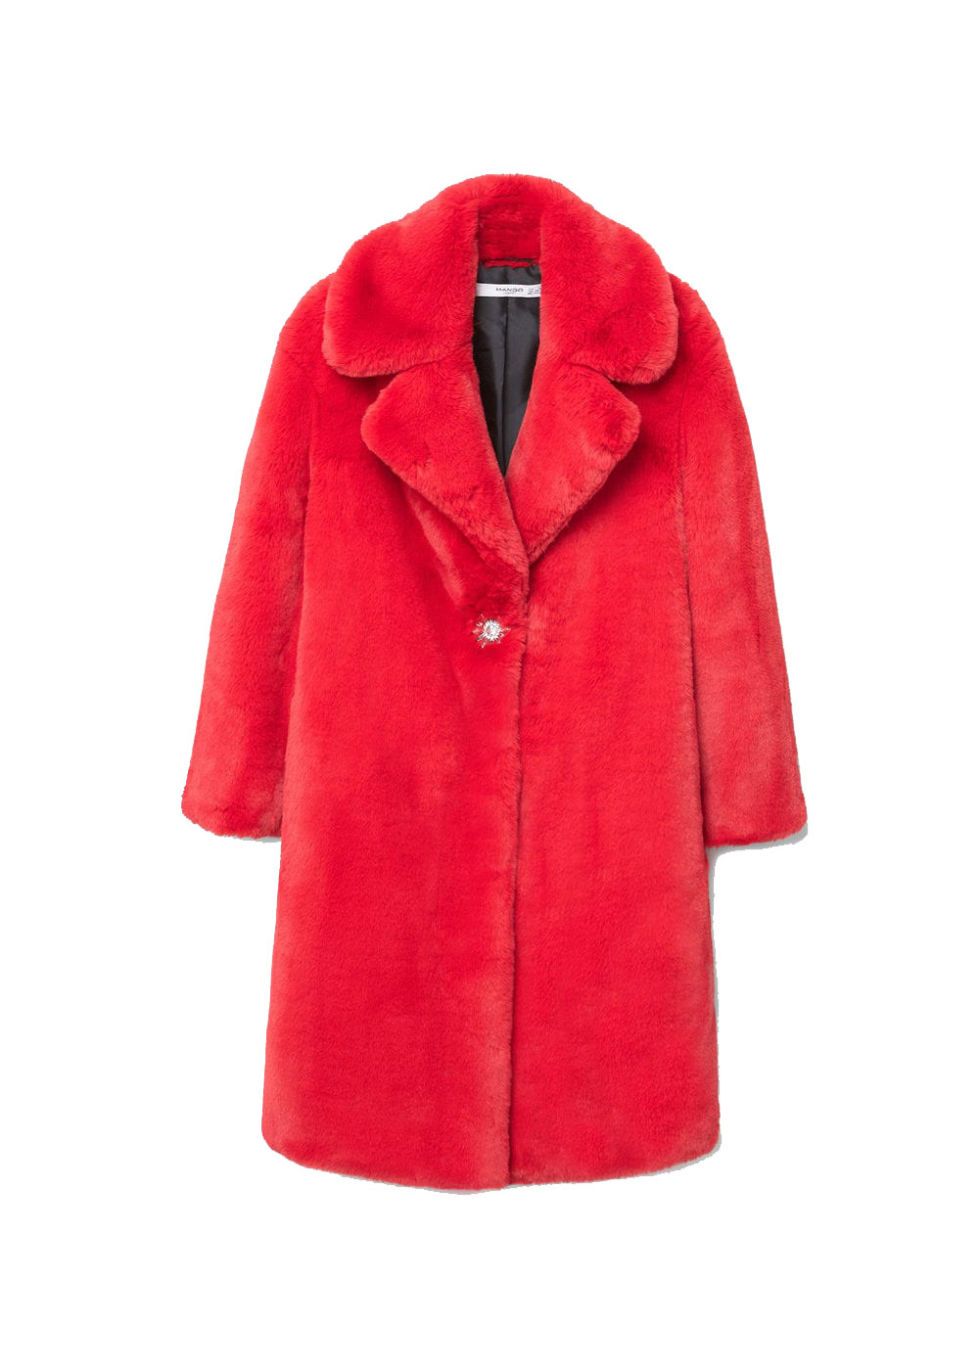 Clothing, Outerwear, Coat, Red, Sleeve, Fur, Fur clothing, Overcoat, Collar, Jacket, 